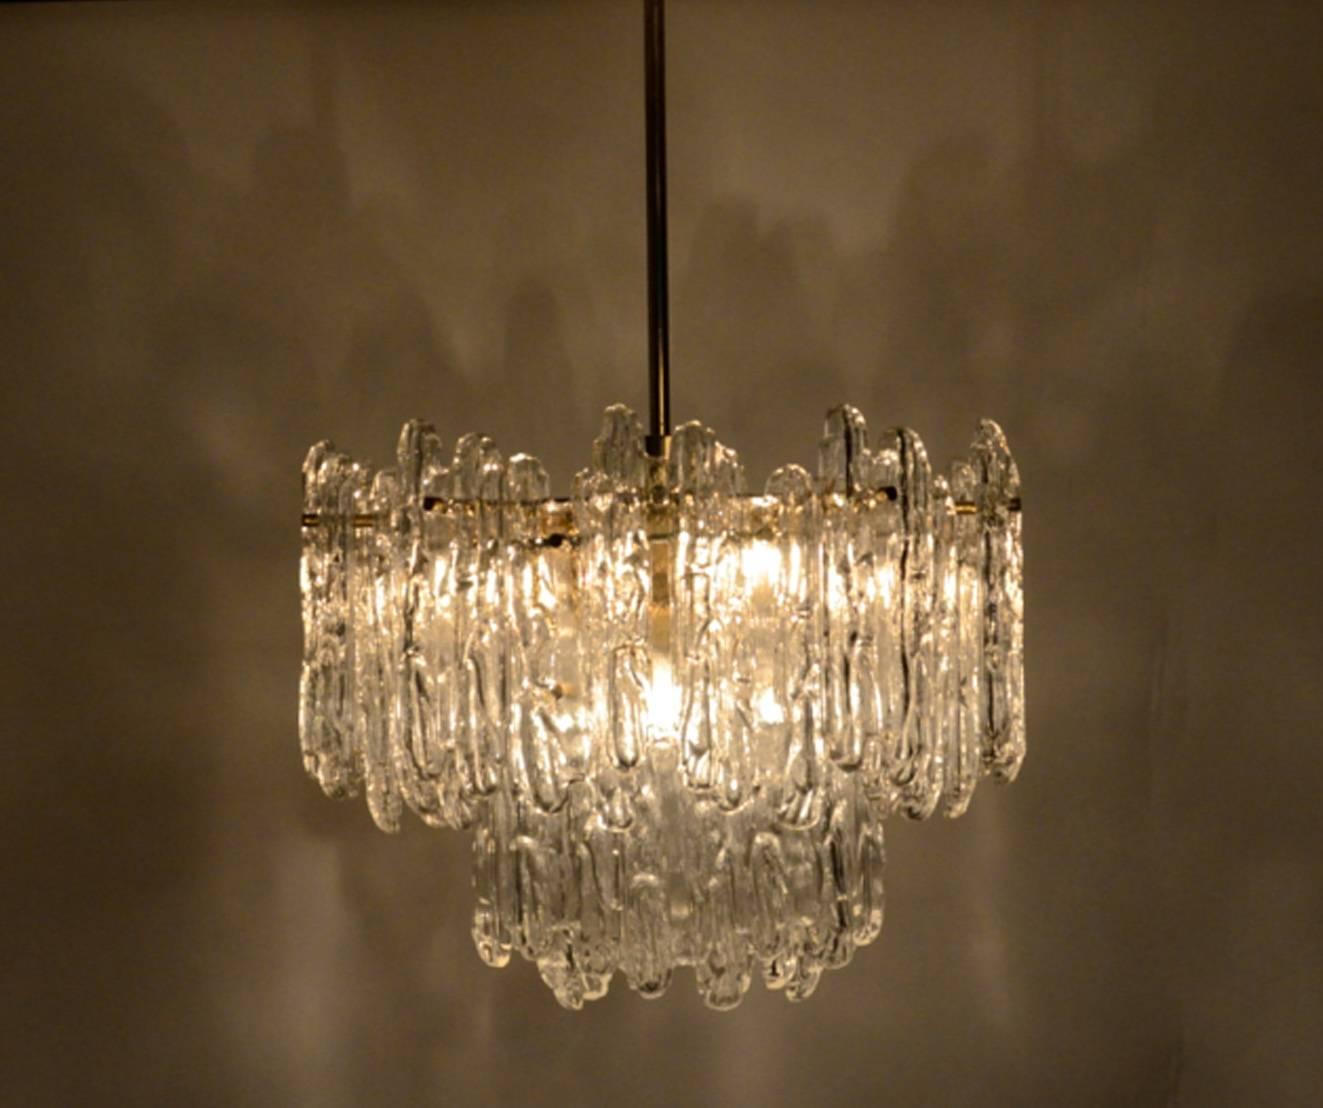 This modernist iceglass chandelier with 26 glasses was designed by the Kinkeldey design team during the 1970s, and manufactured in Germany. A very elegant Kinkeldey chandelier, it is comfortable with all decor periods. The pattern of the glass